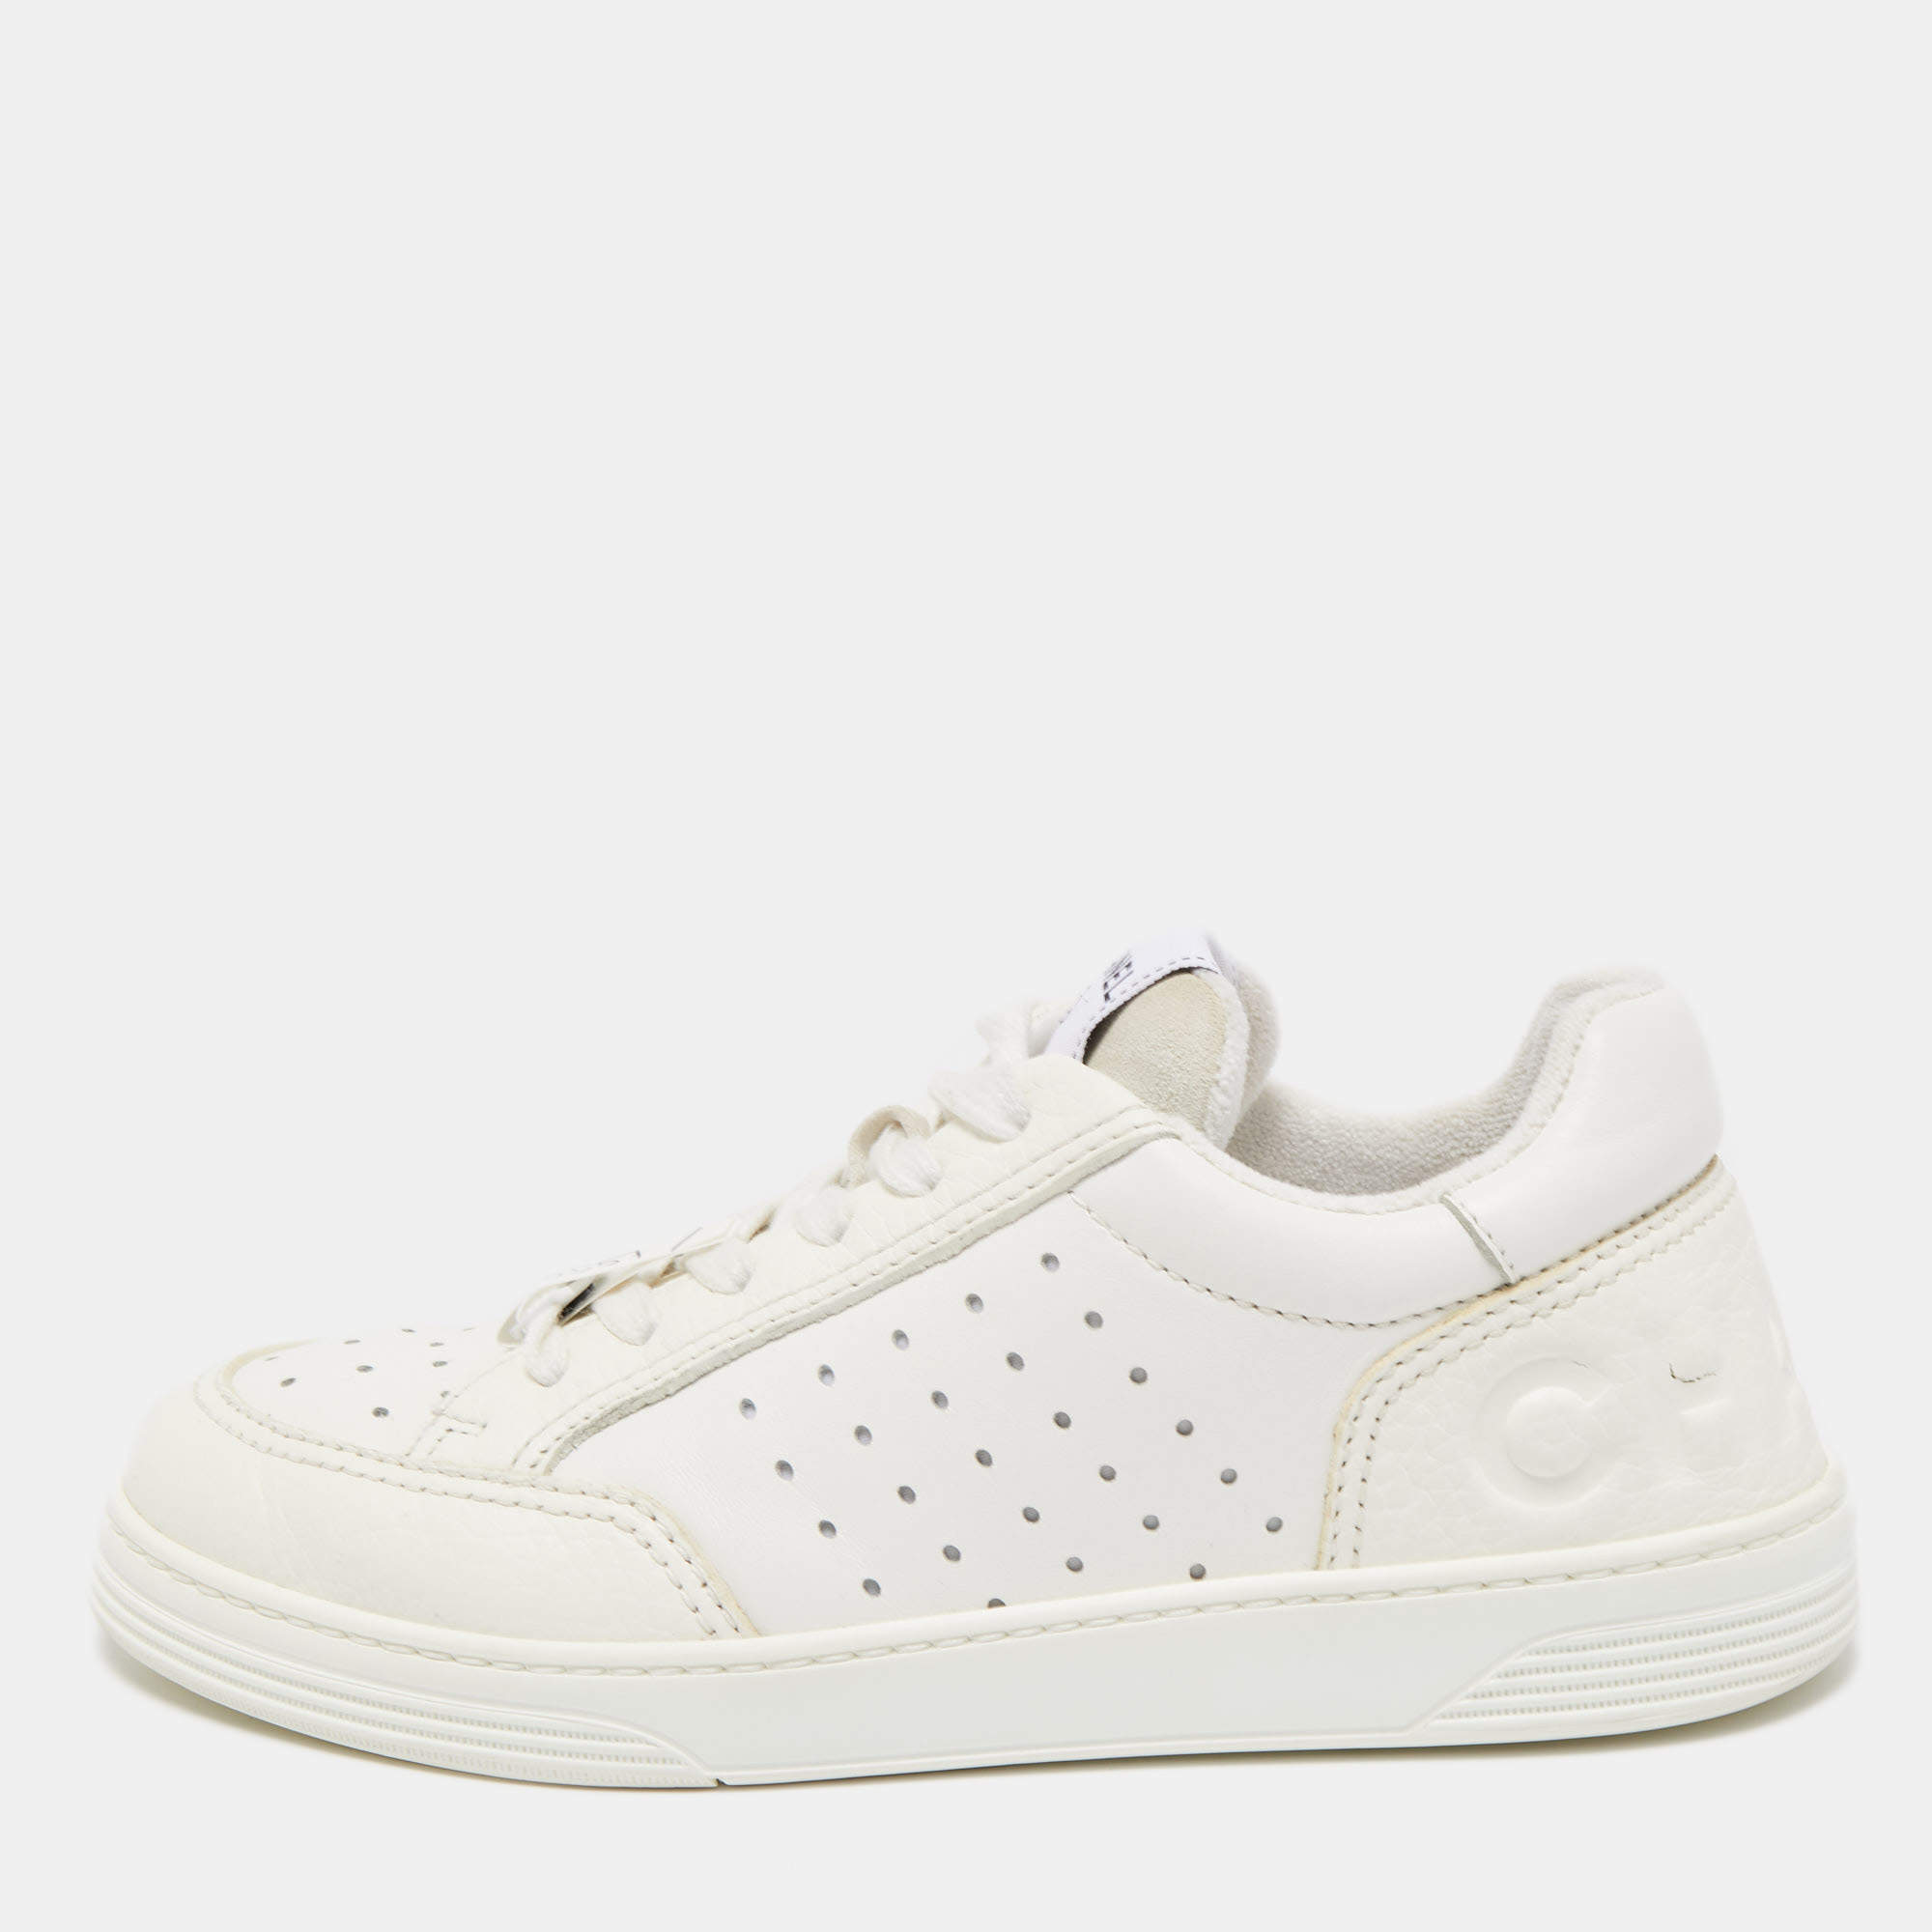 Chanel White Perforated Leather CC Low Top Sneakers Size 37